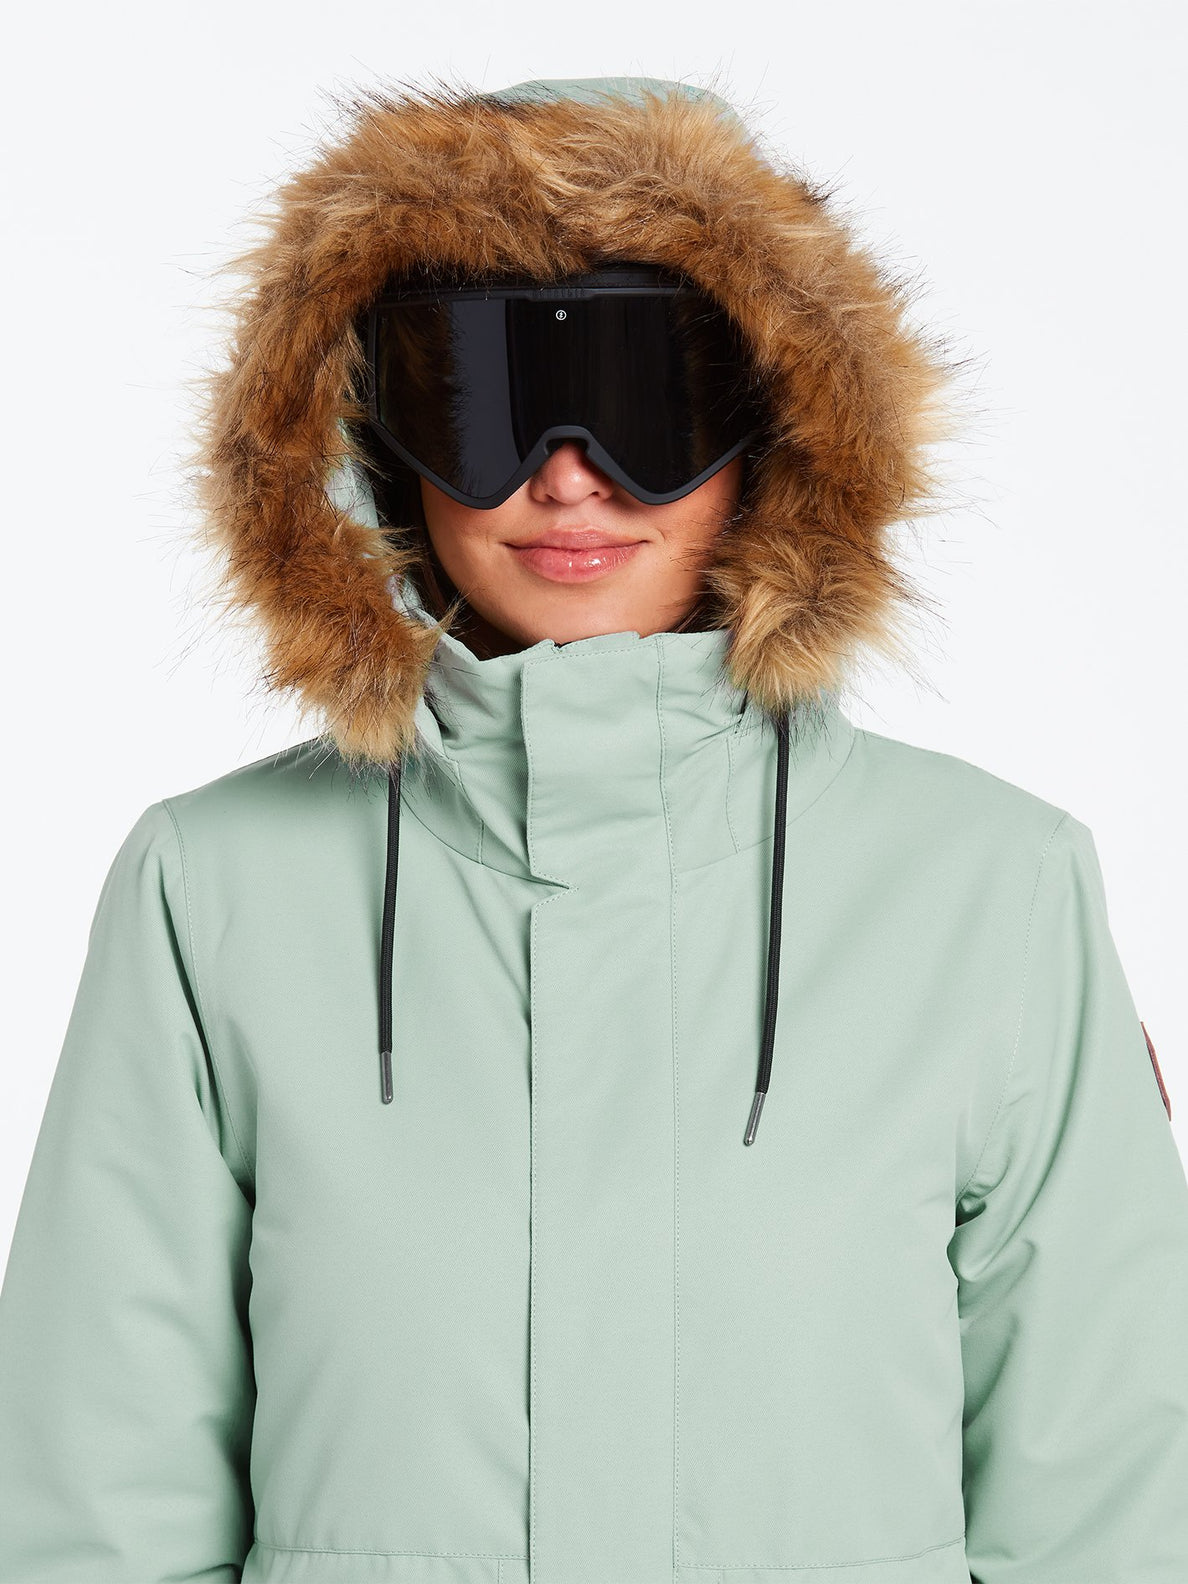 Fawn Insulated Jacket - MINT (H0452011_MNT) [23]